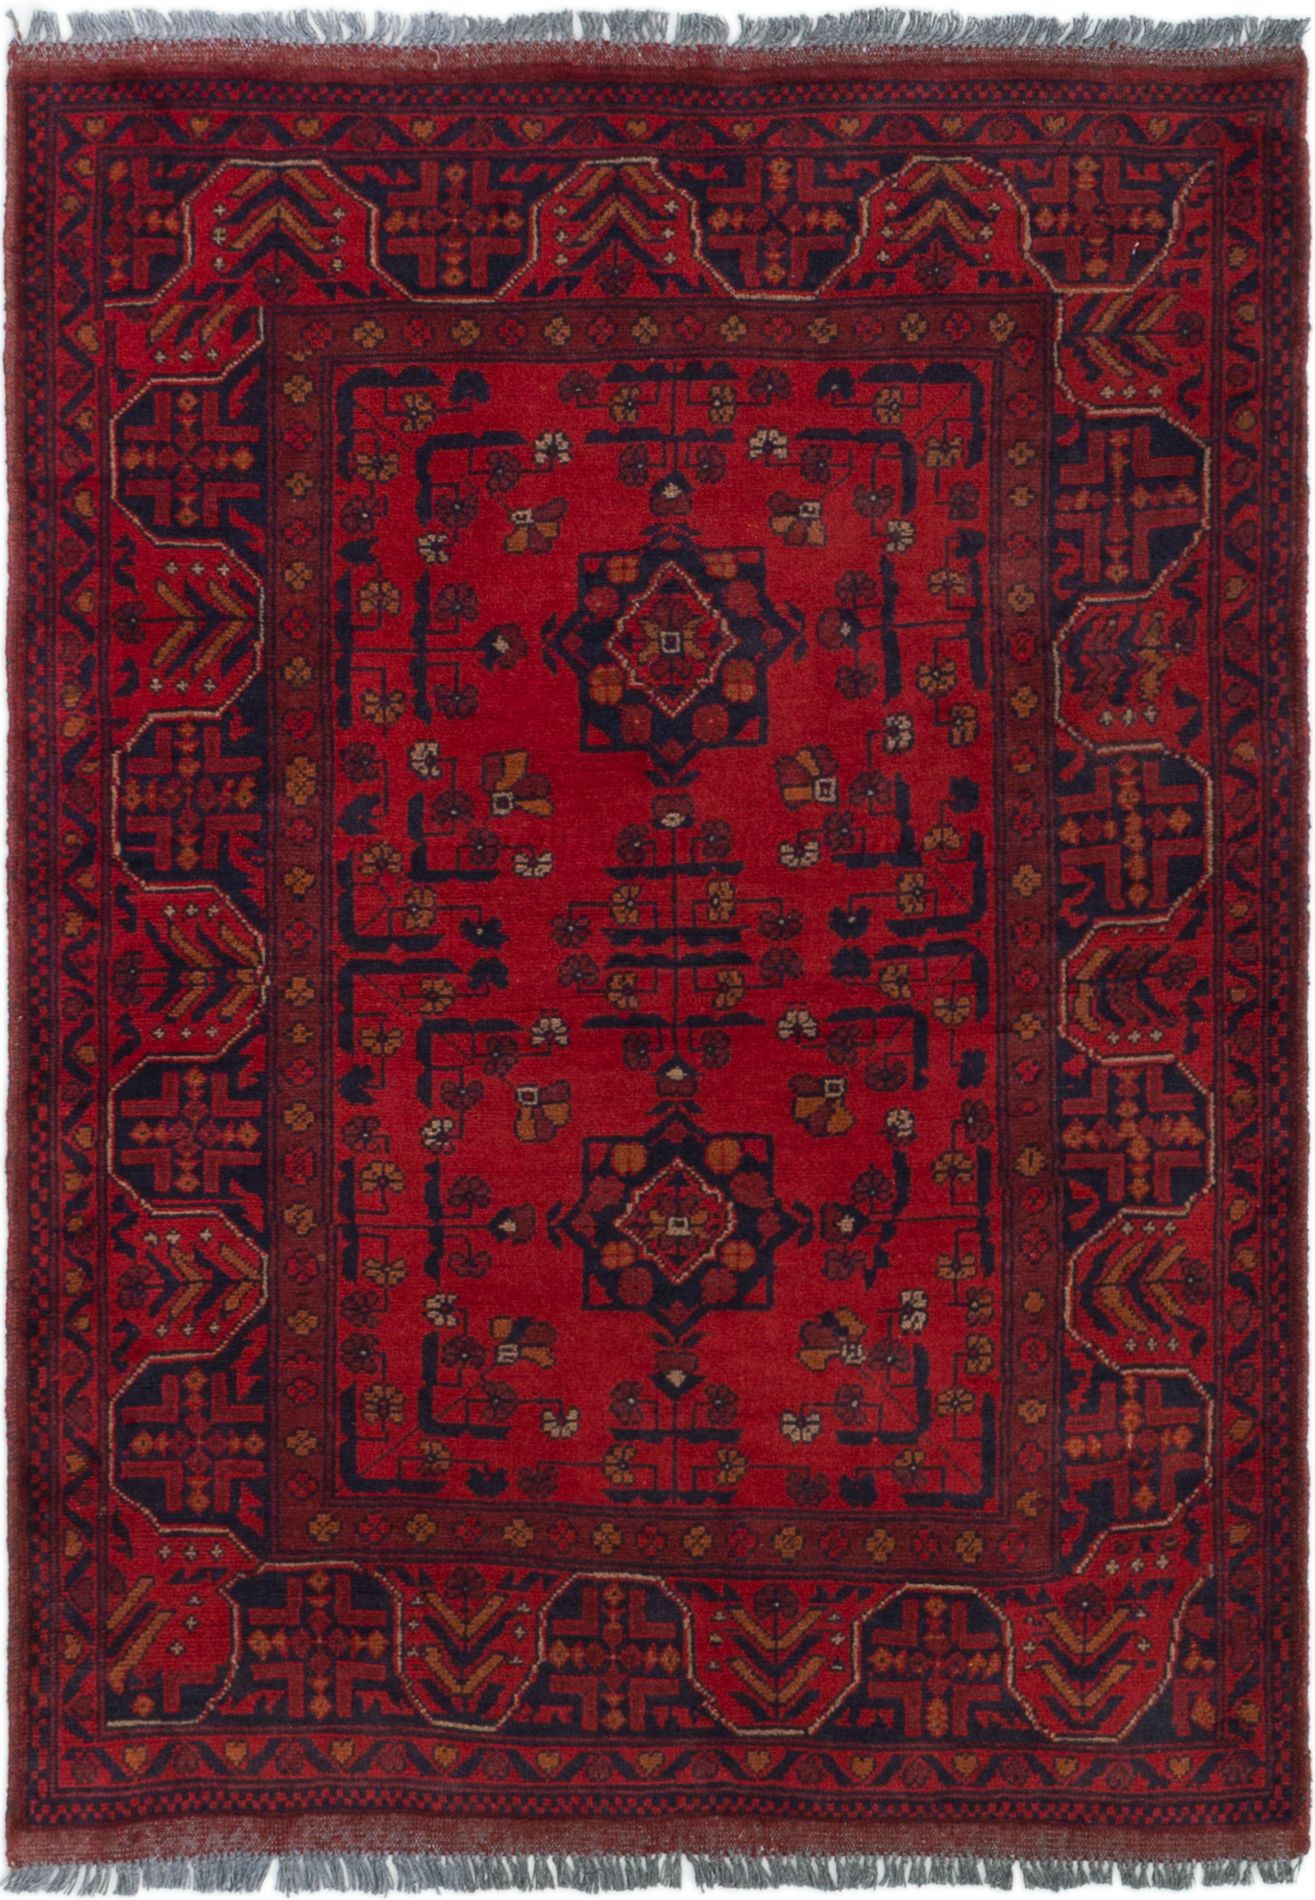 Hand-knotted Finest Khal Mohammadi Red Wool Rug 3'3" x 4'7"  Size: 3'3" x 4'7"  